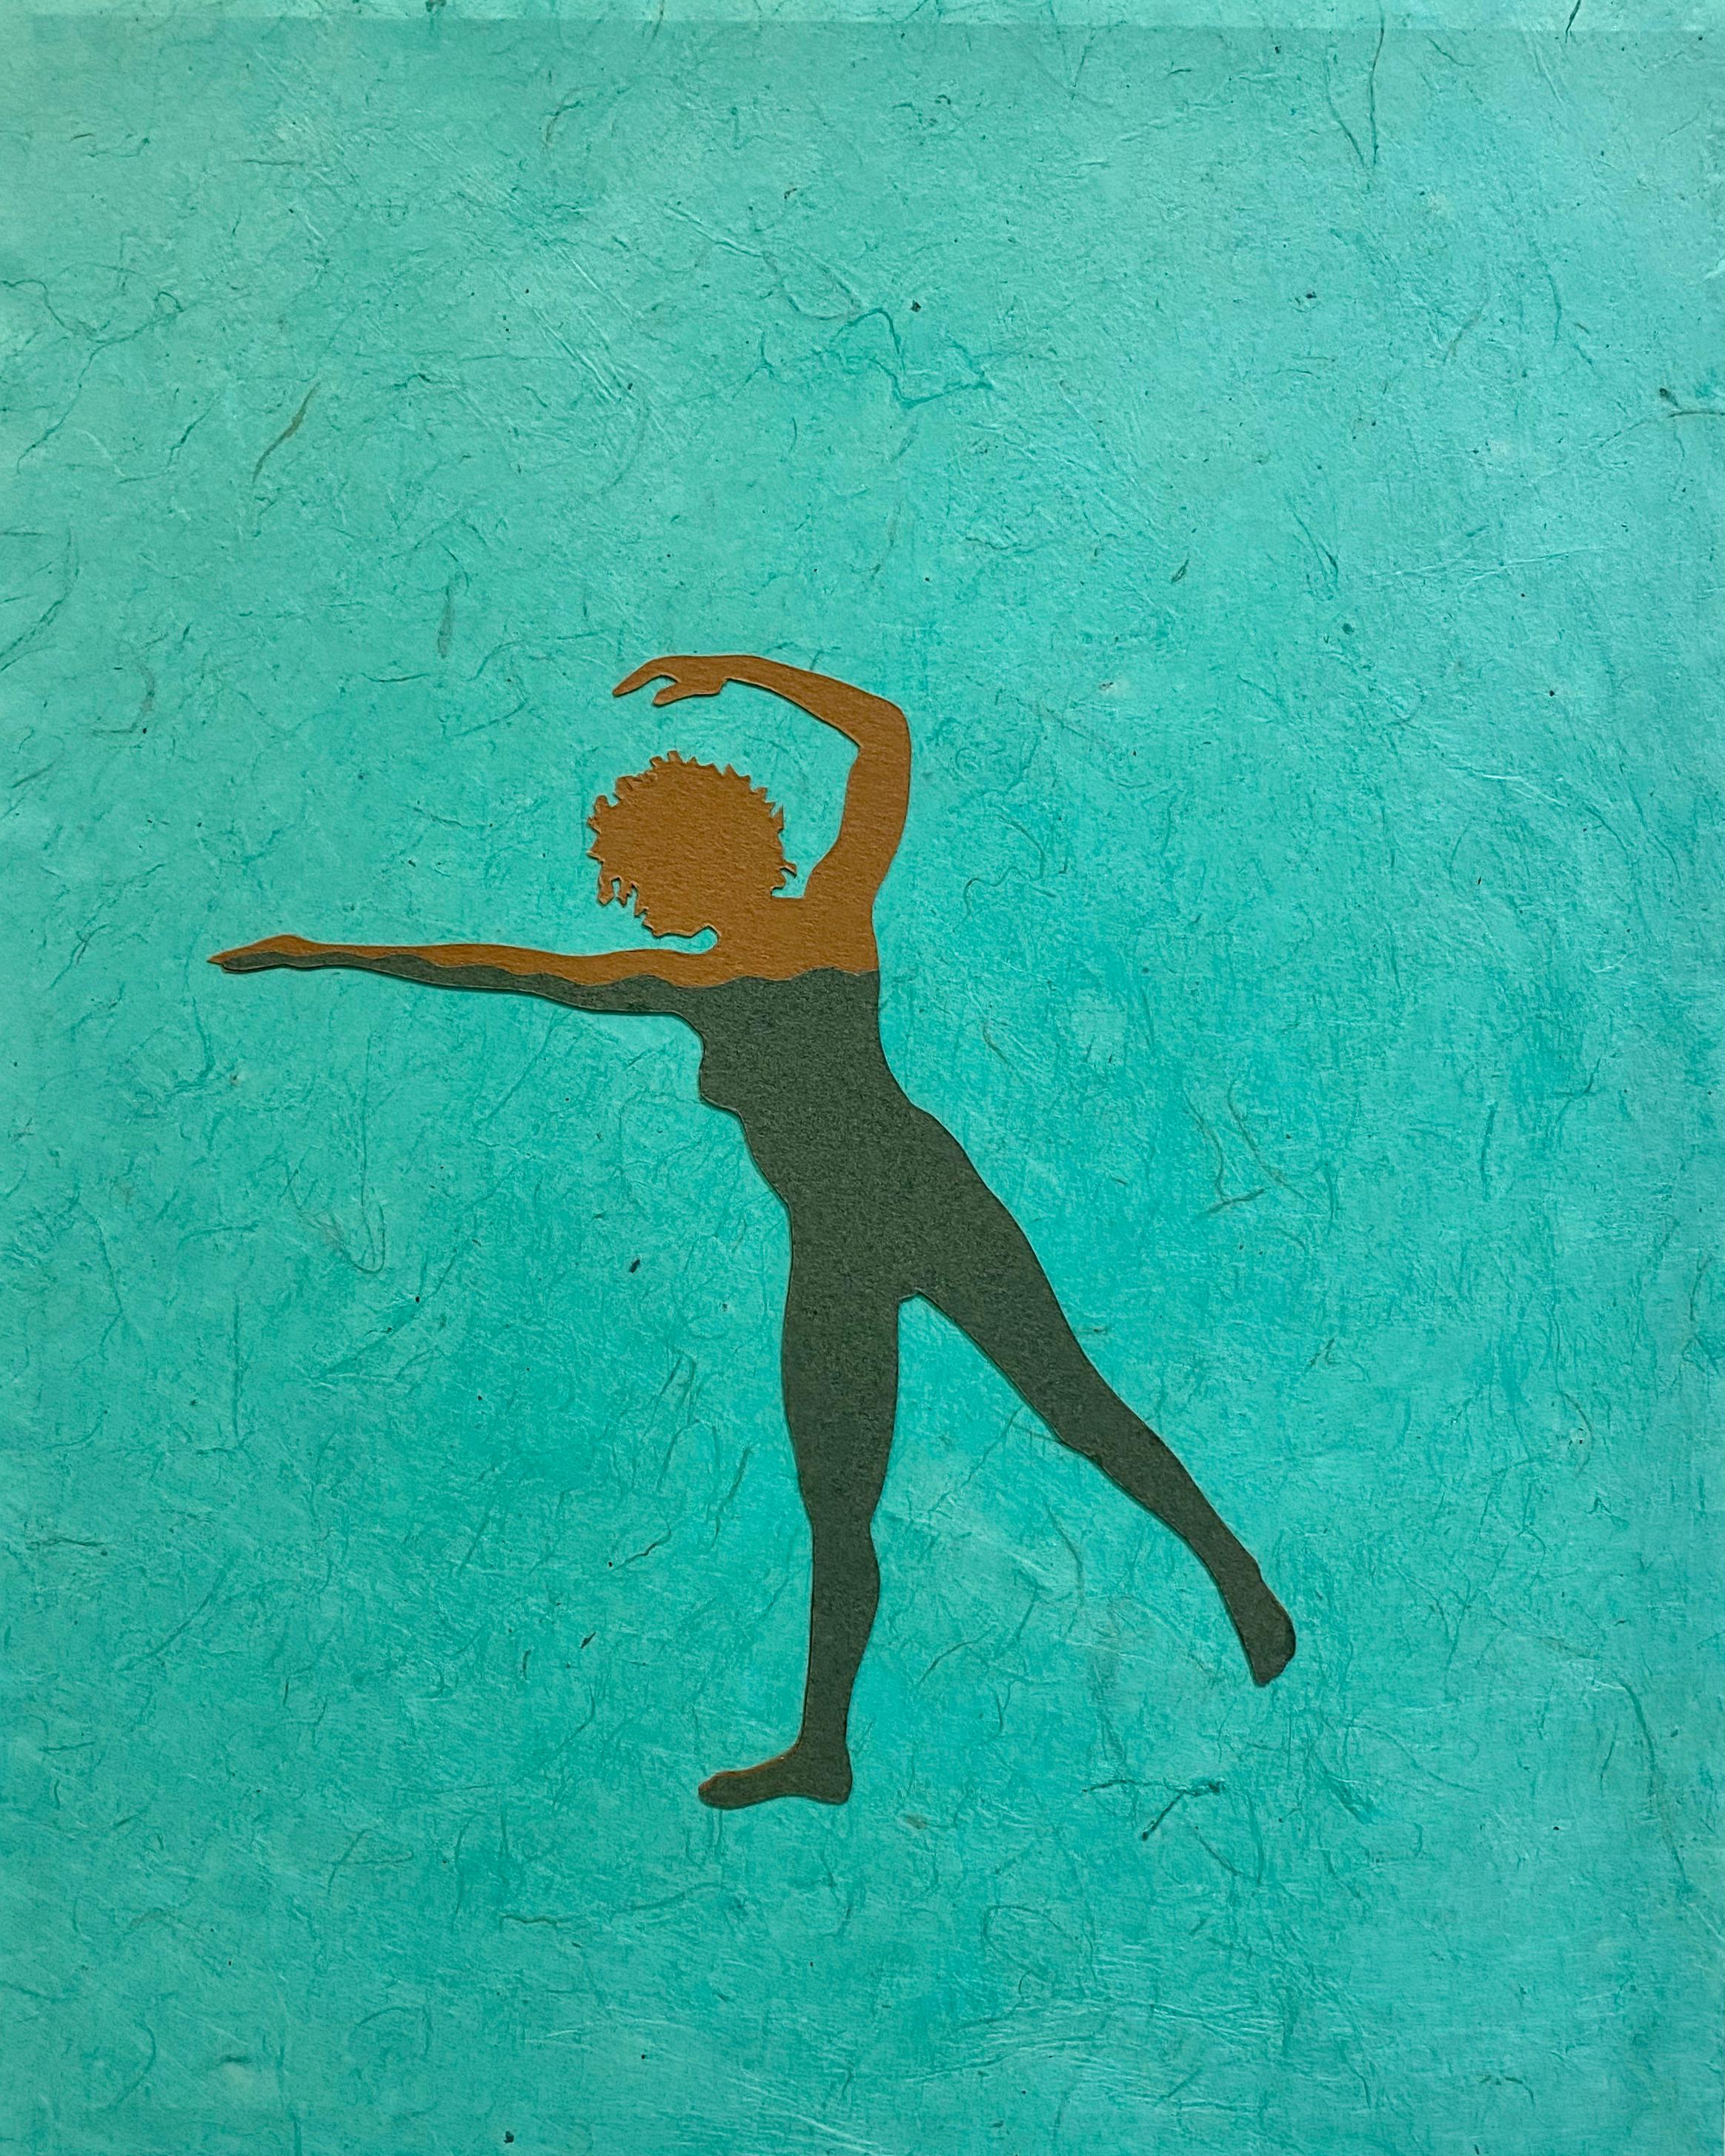 Untitled 9, Paper Collage, Female Swimmer Figure in Brown on Teal Green - Mixed Media Art by Jessica Maffia